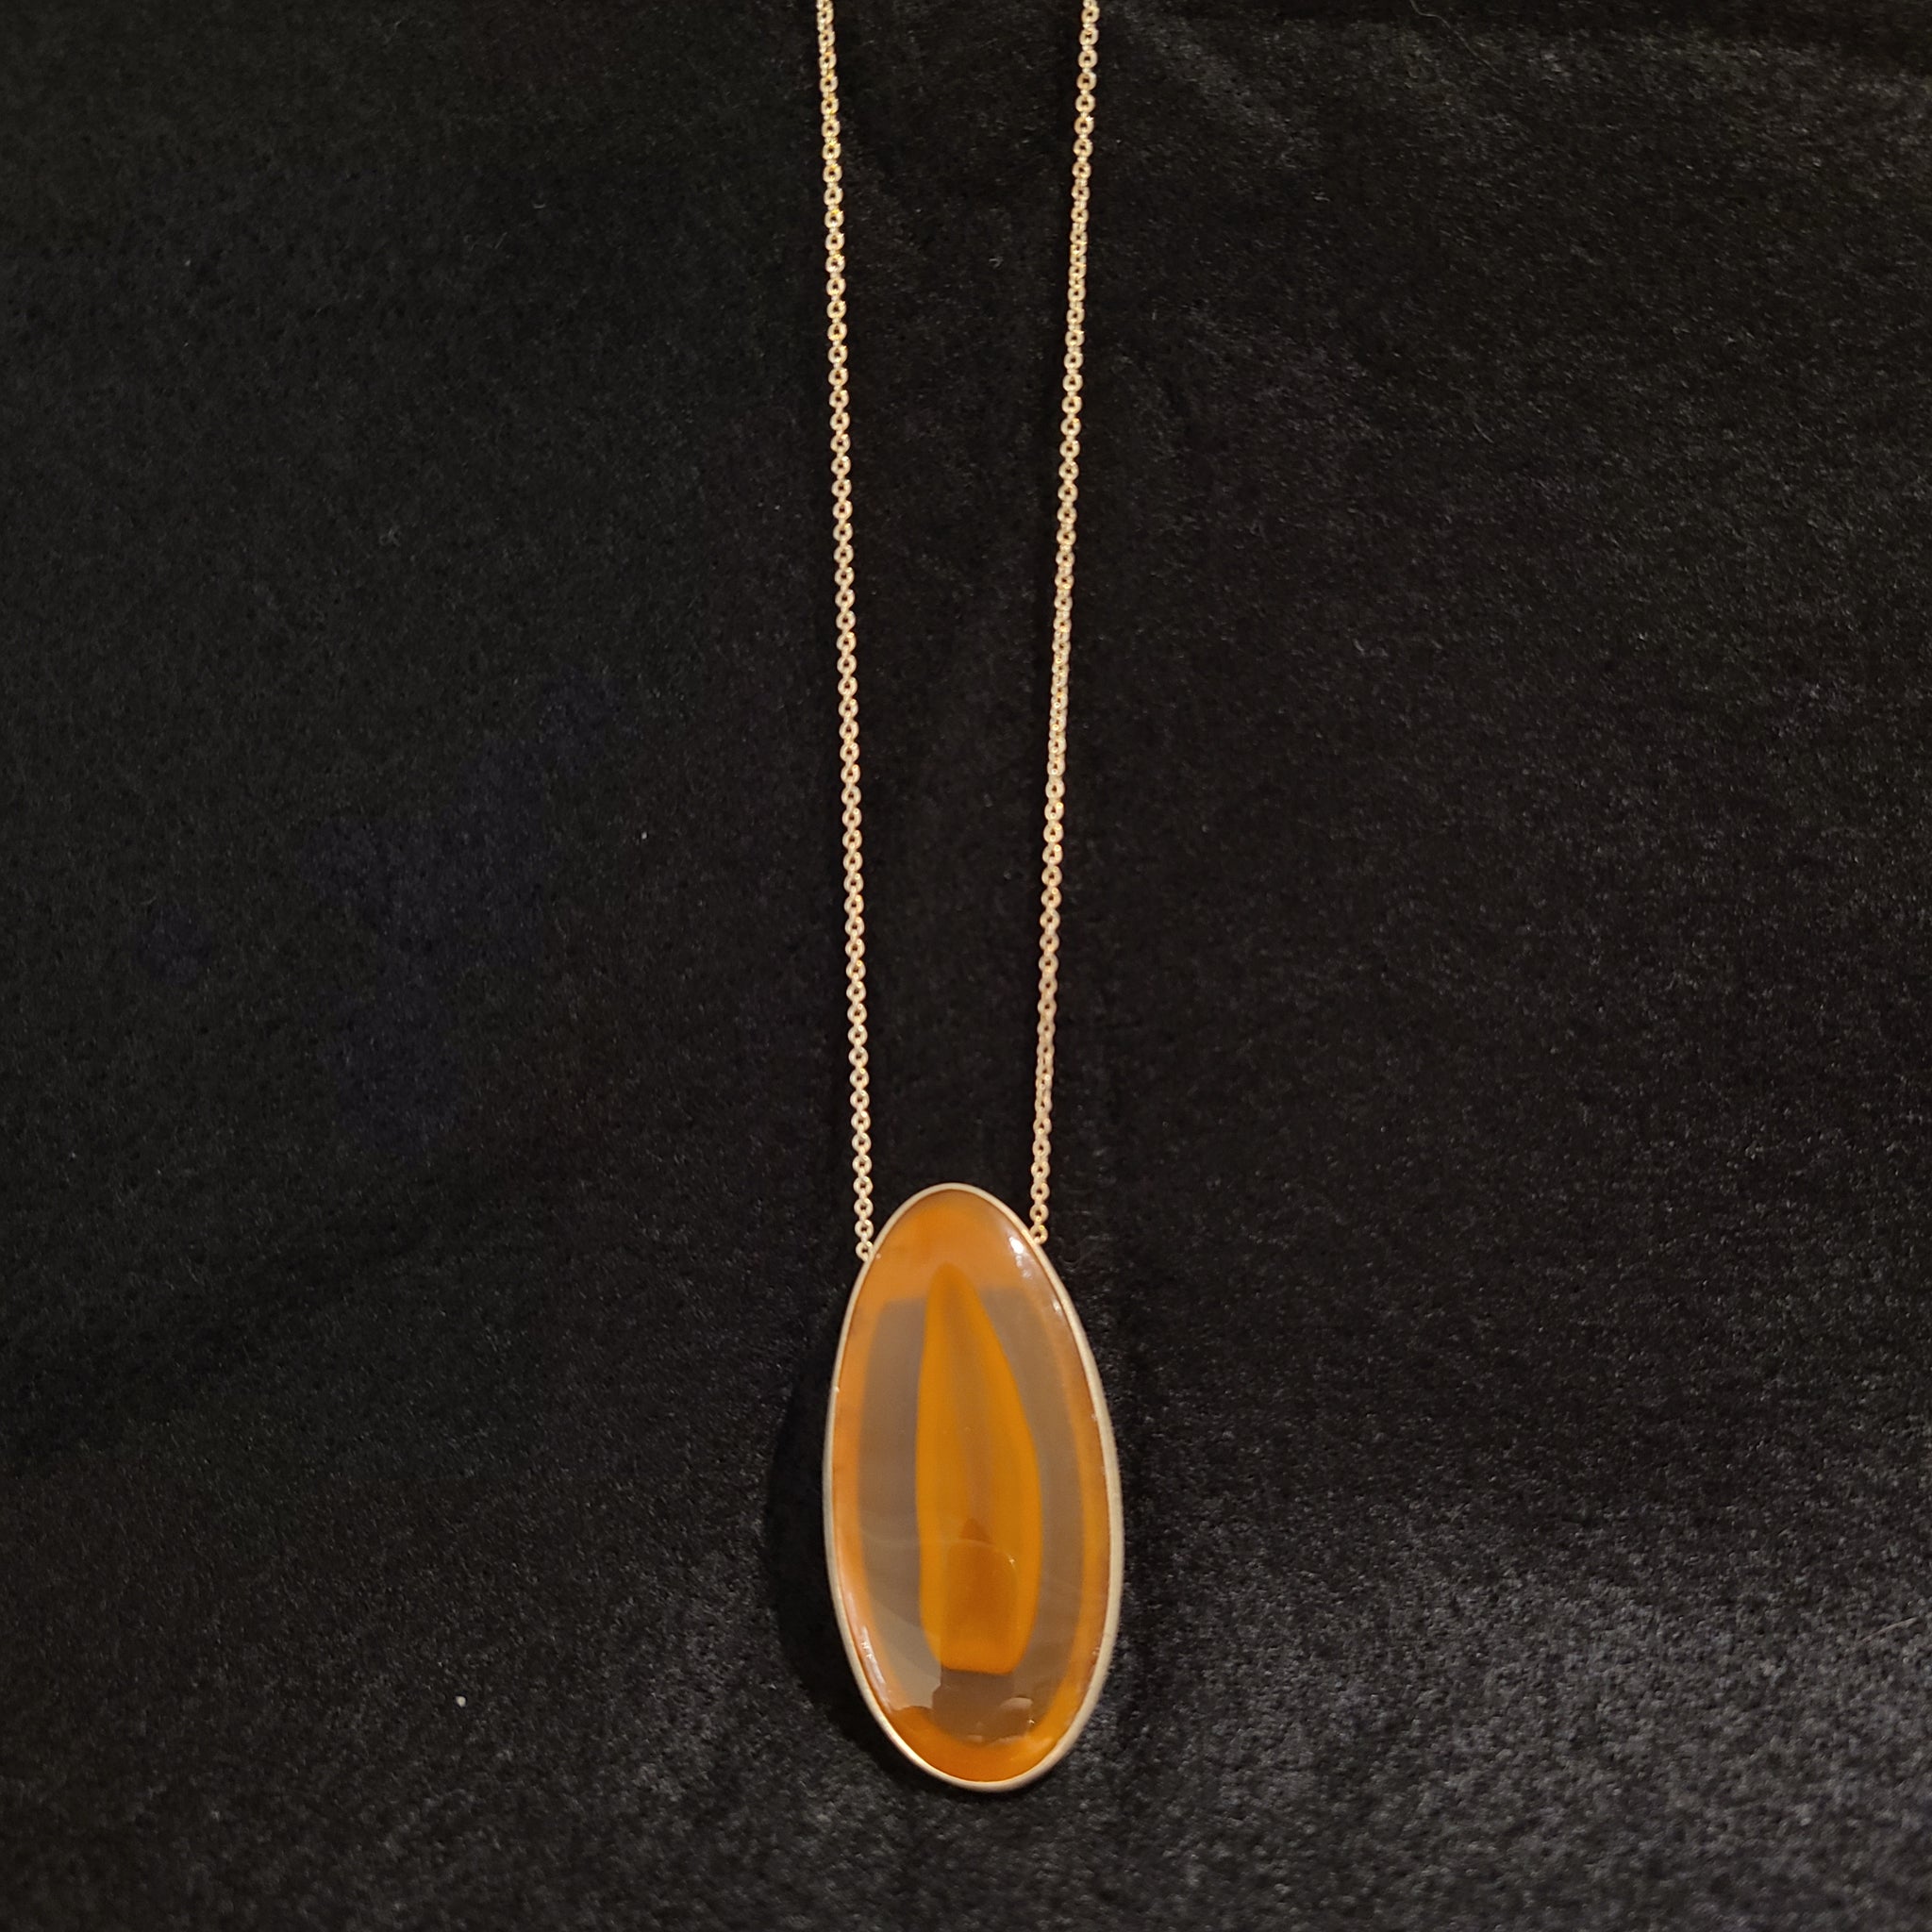 MeritMade - Necklace - Agate - 16/18" Chain